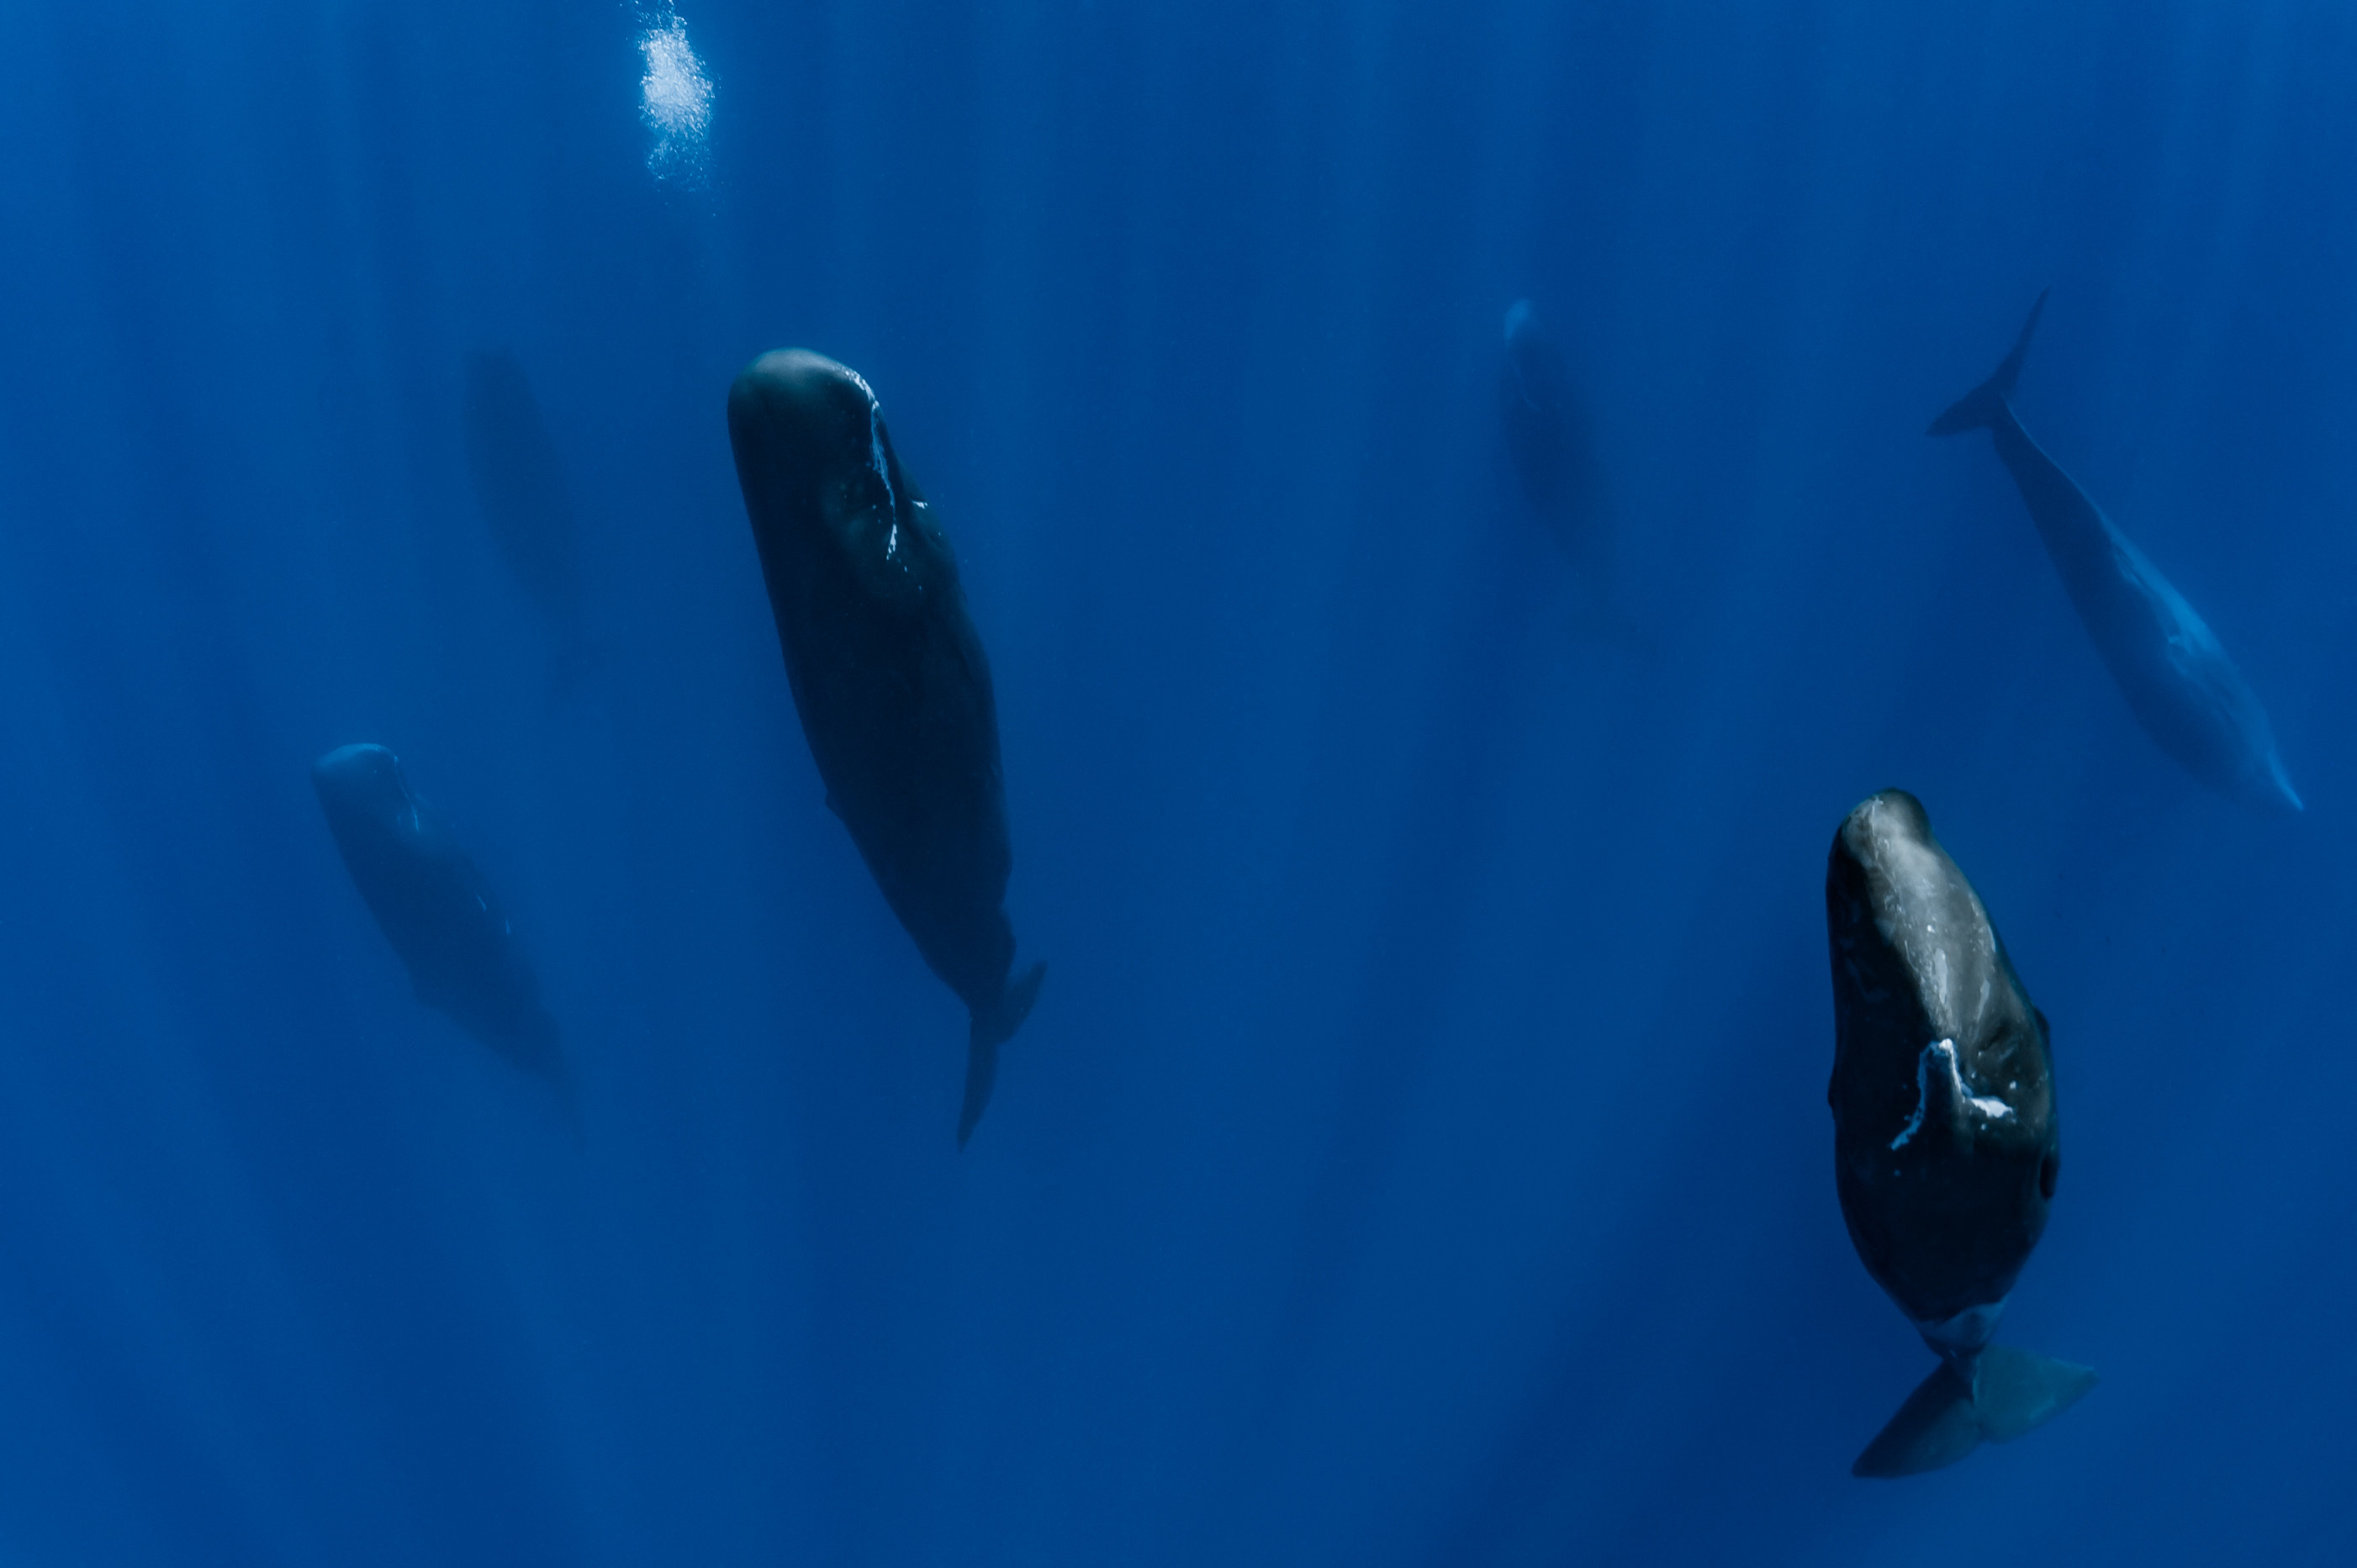 A group of whales sleeping